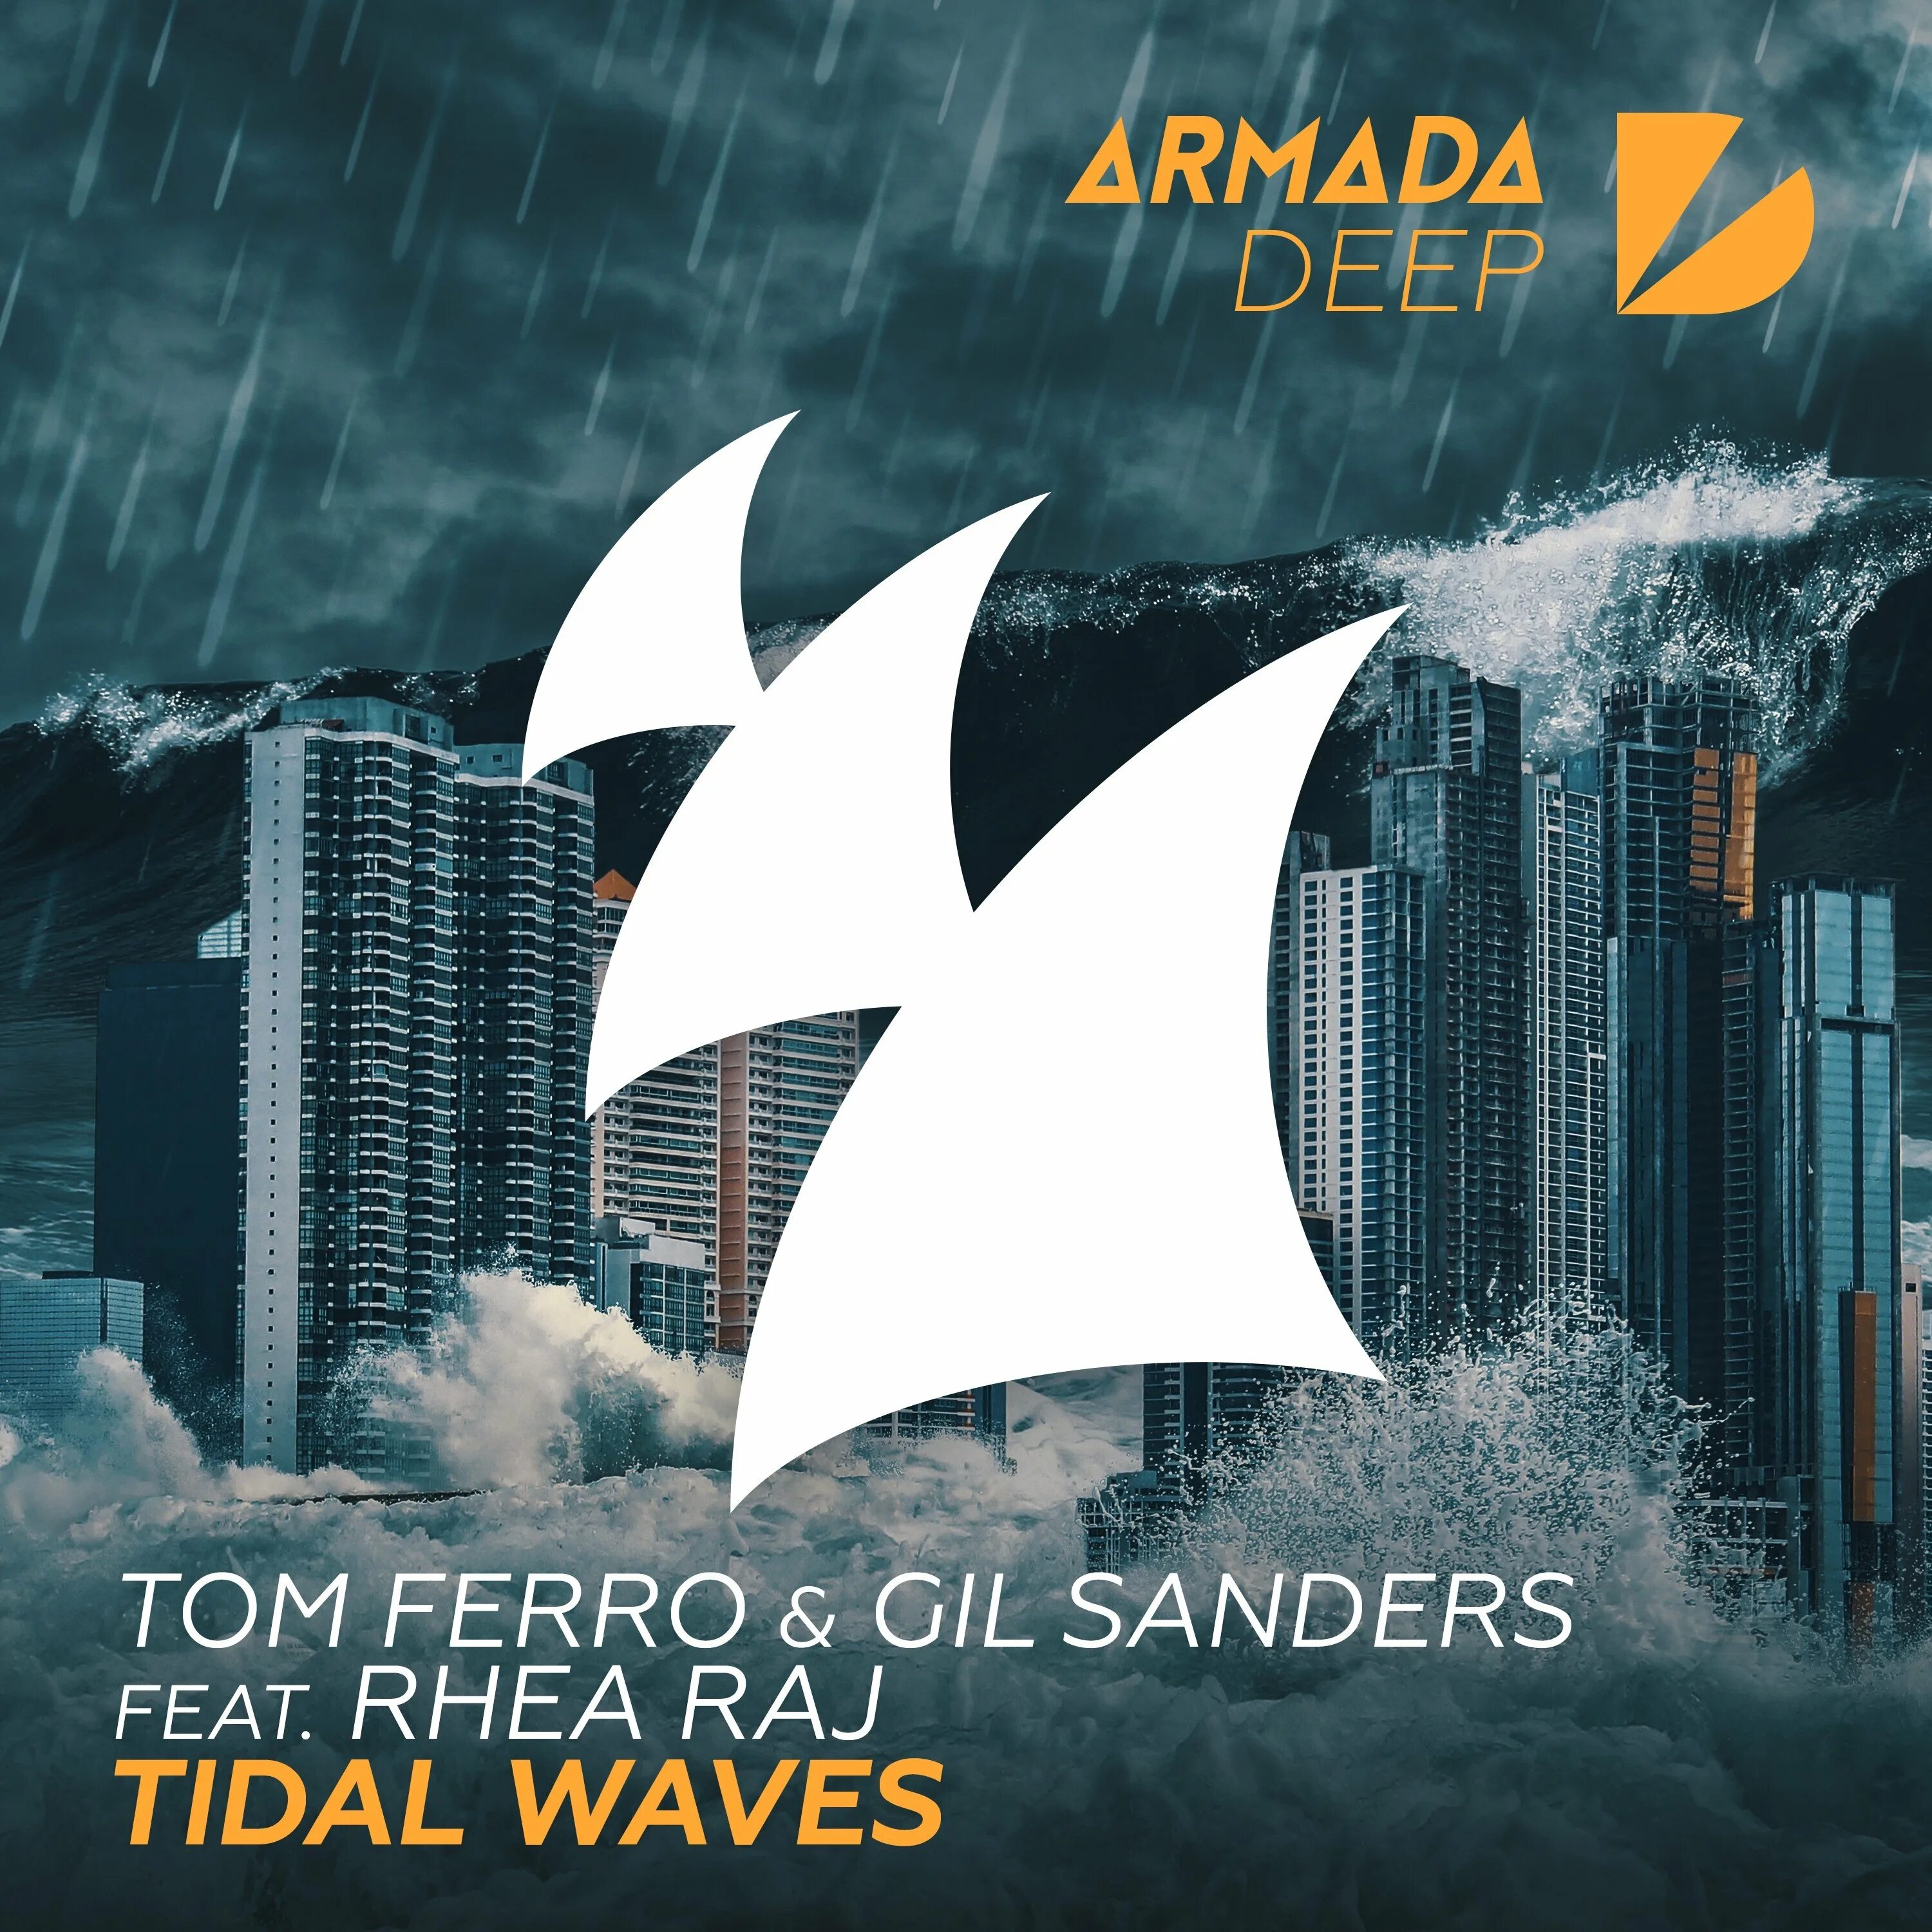 Waves feat. Gil Sanders. Tom Ferro Crossnaders Cray. Offshore feeling (Tidal Wave Mix) (Tidal Wave Mix) (Tidal Wave Mix).